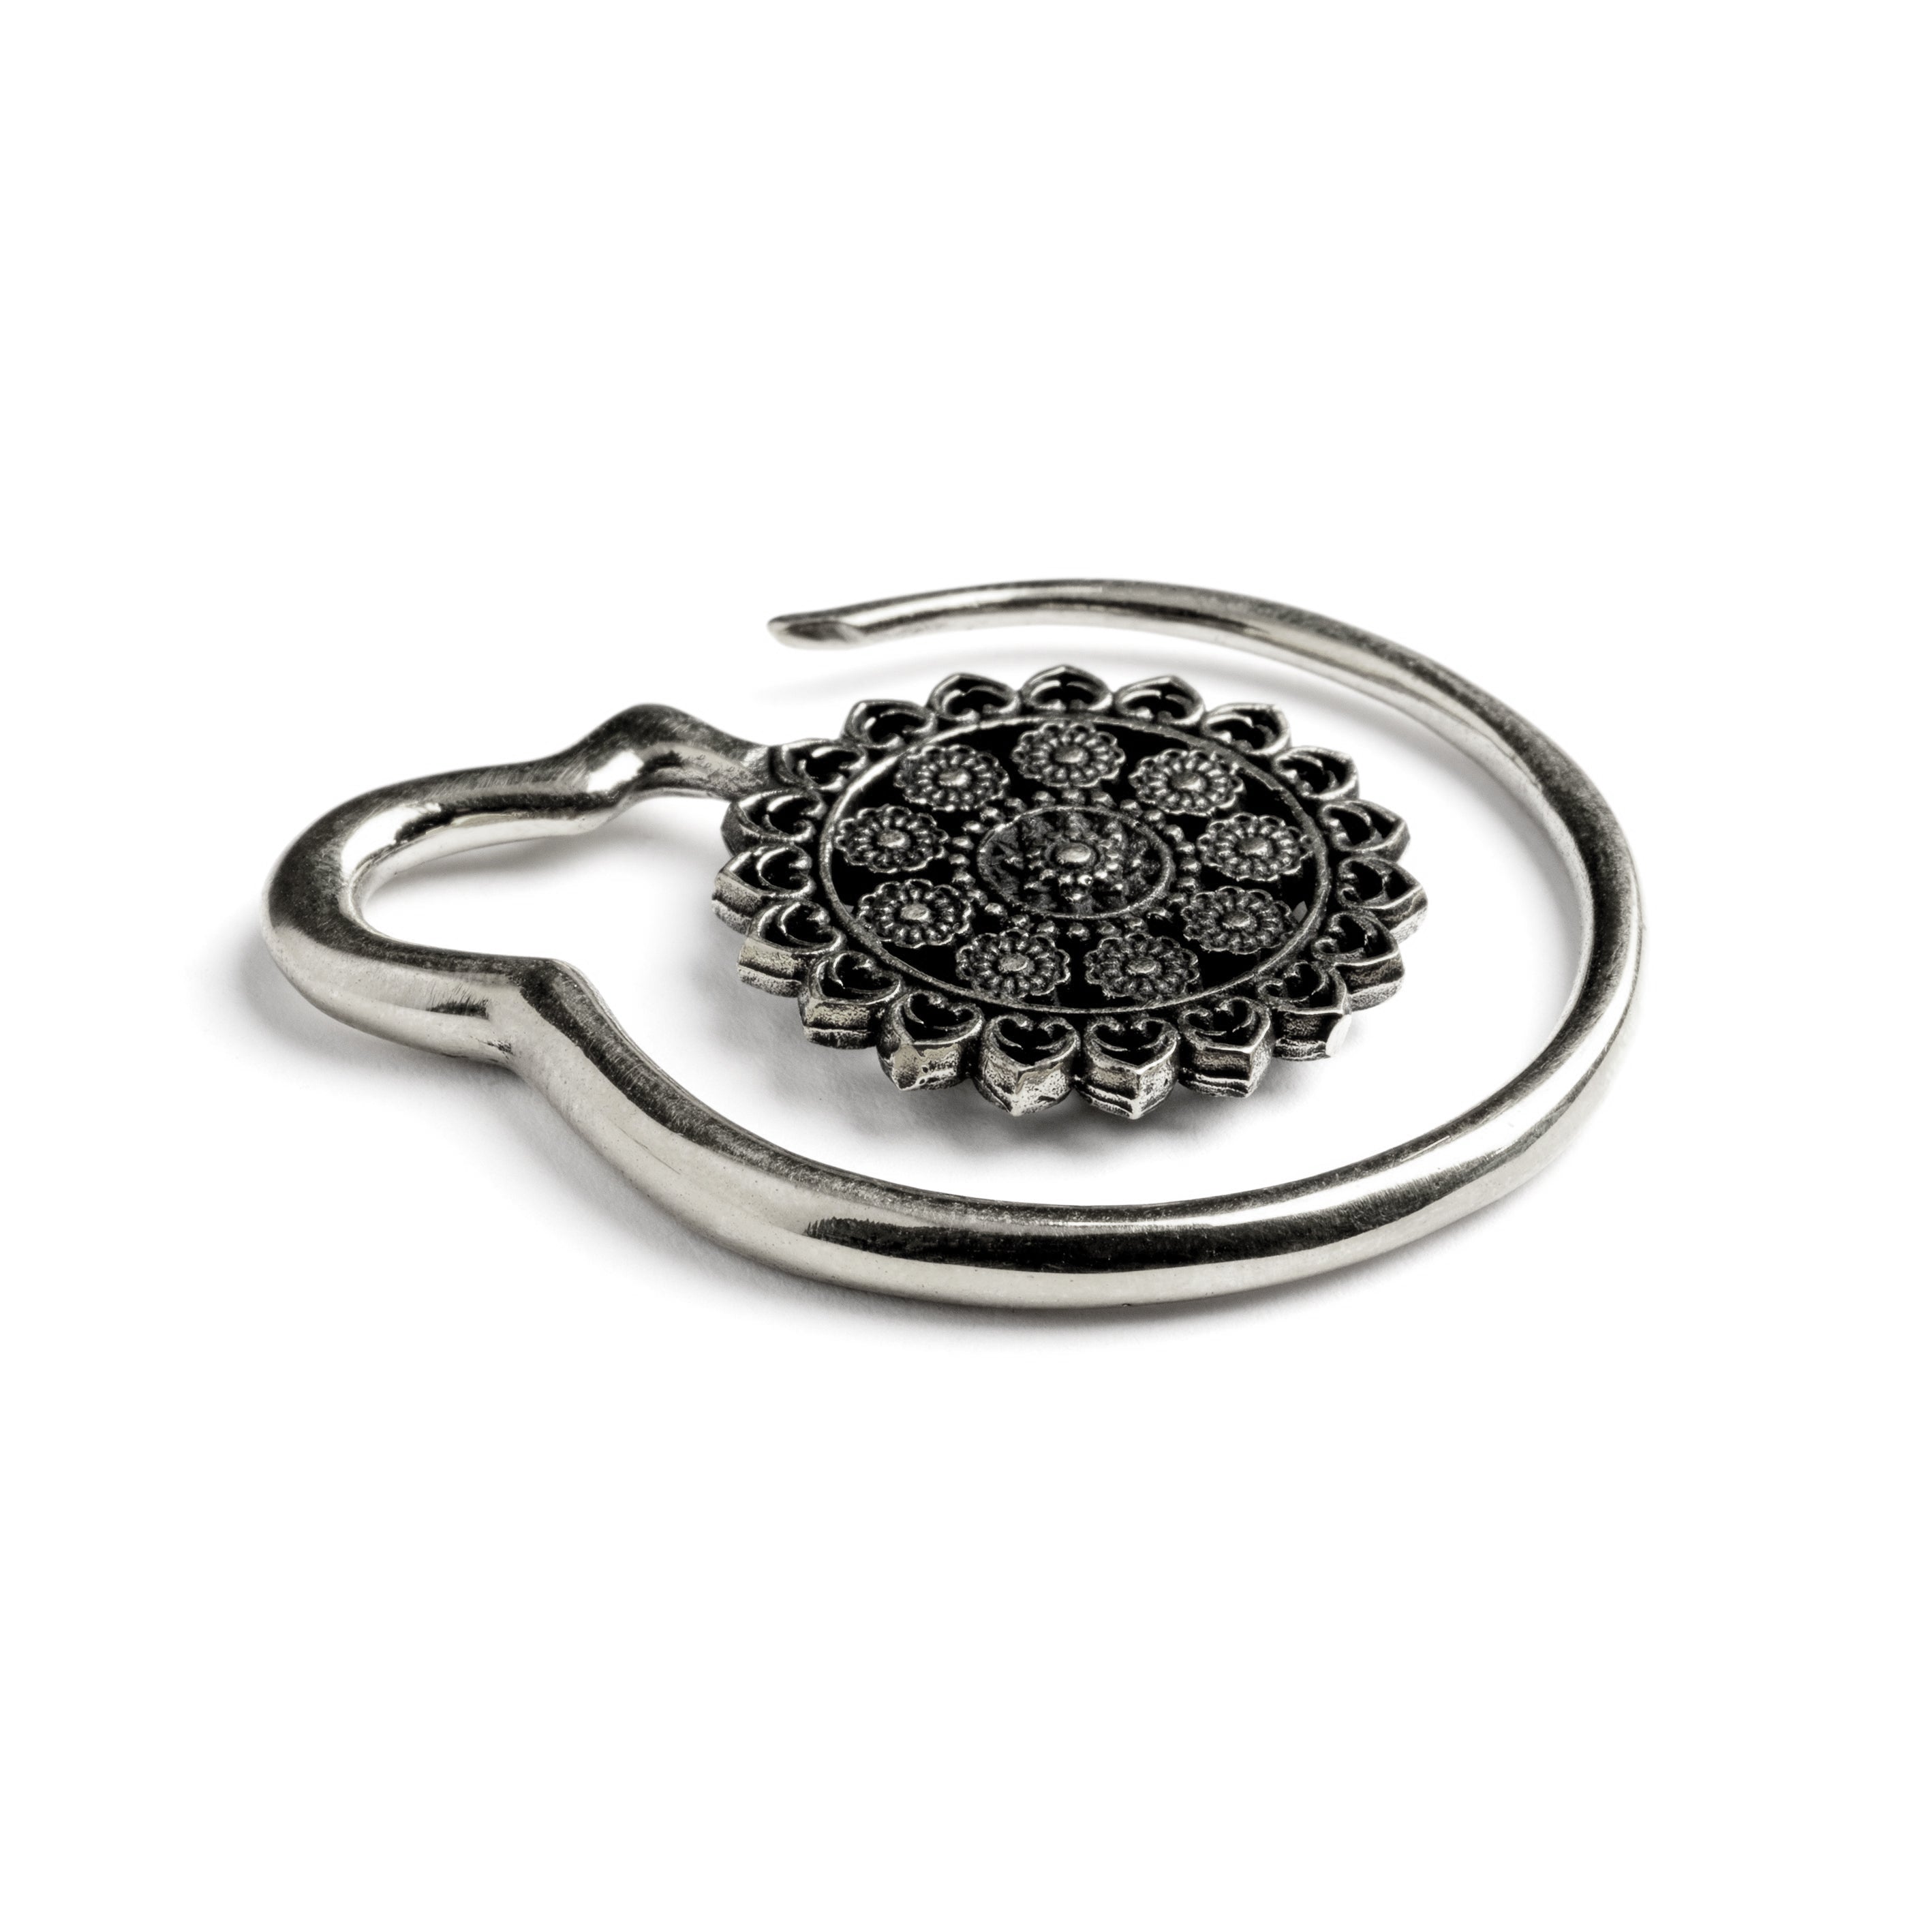 single silver brass hook ear hanger with intricate floral filigree side view